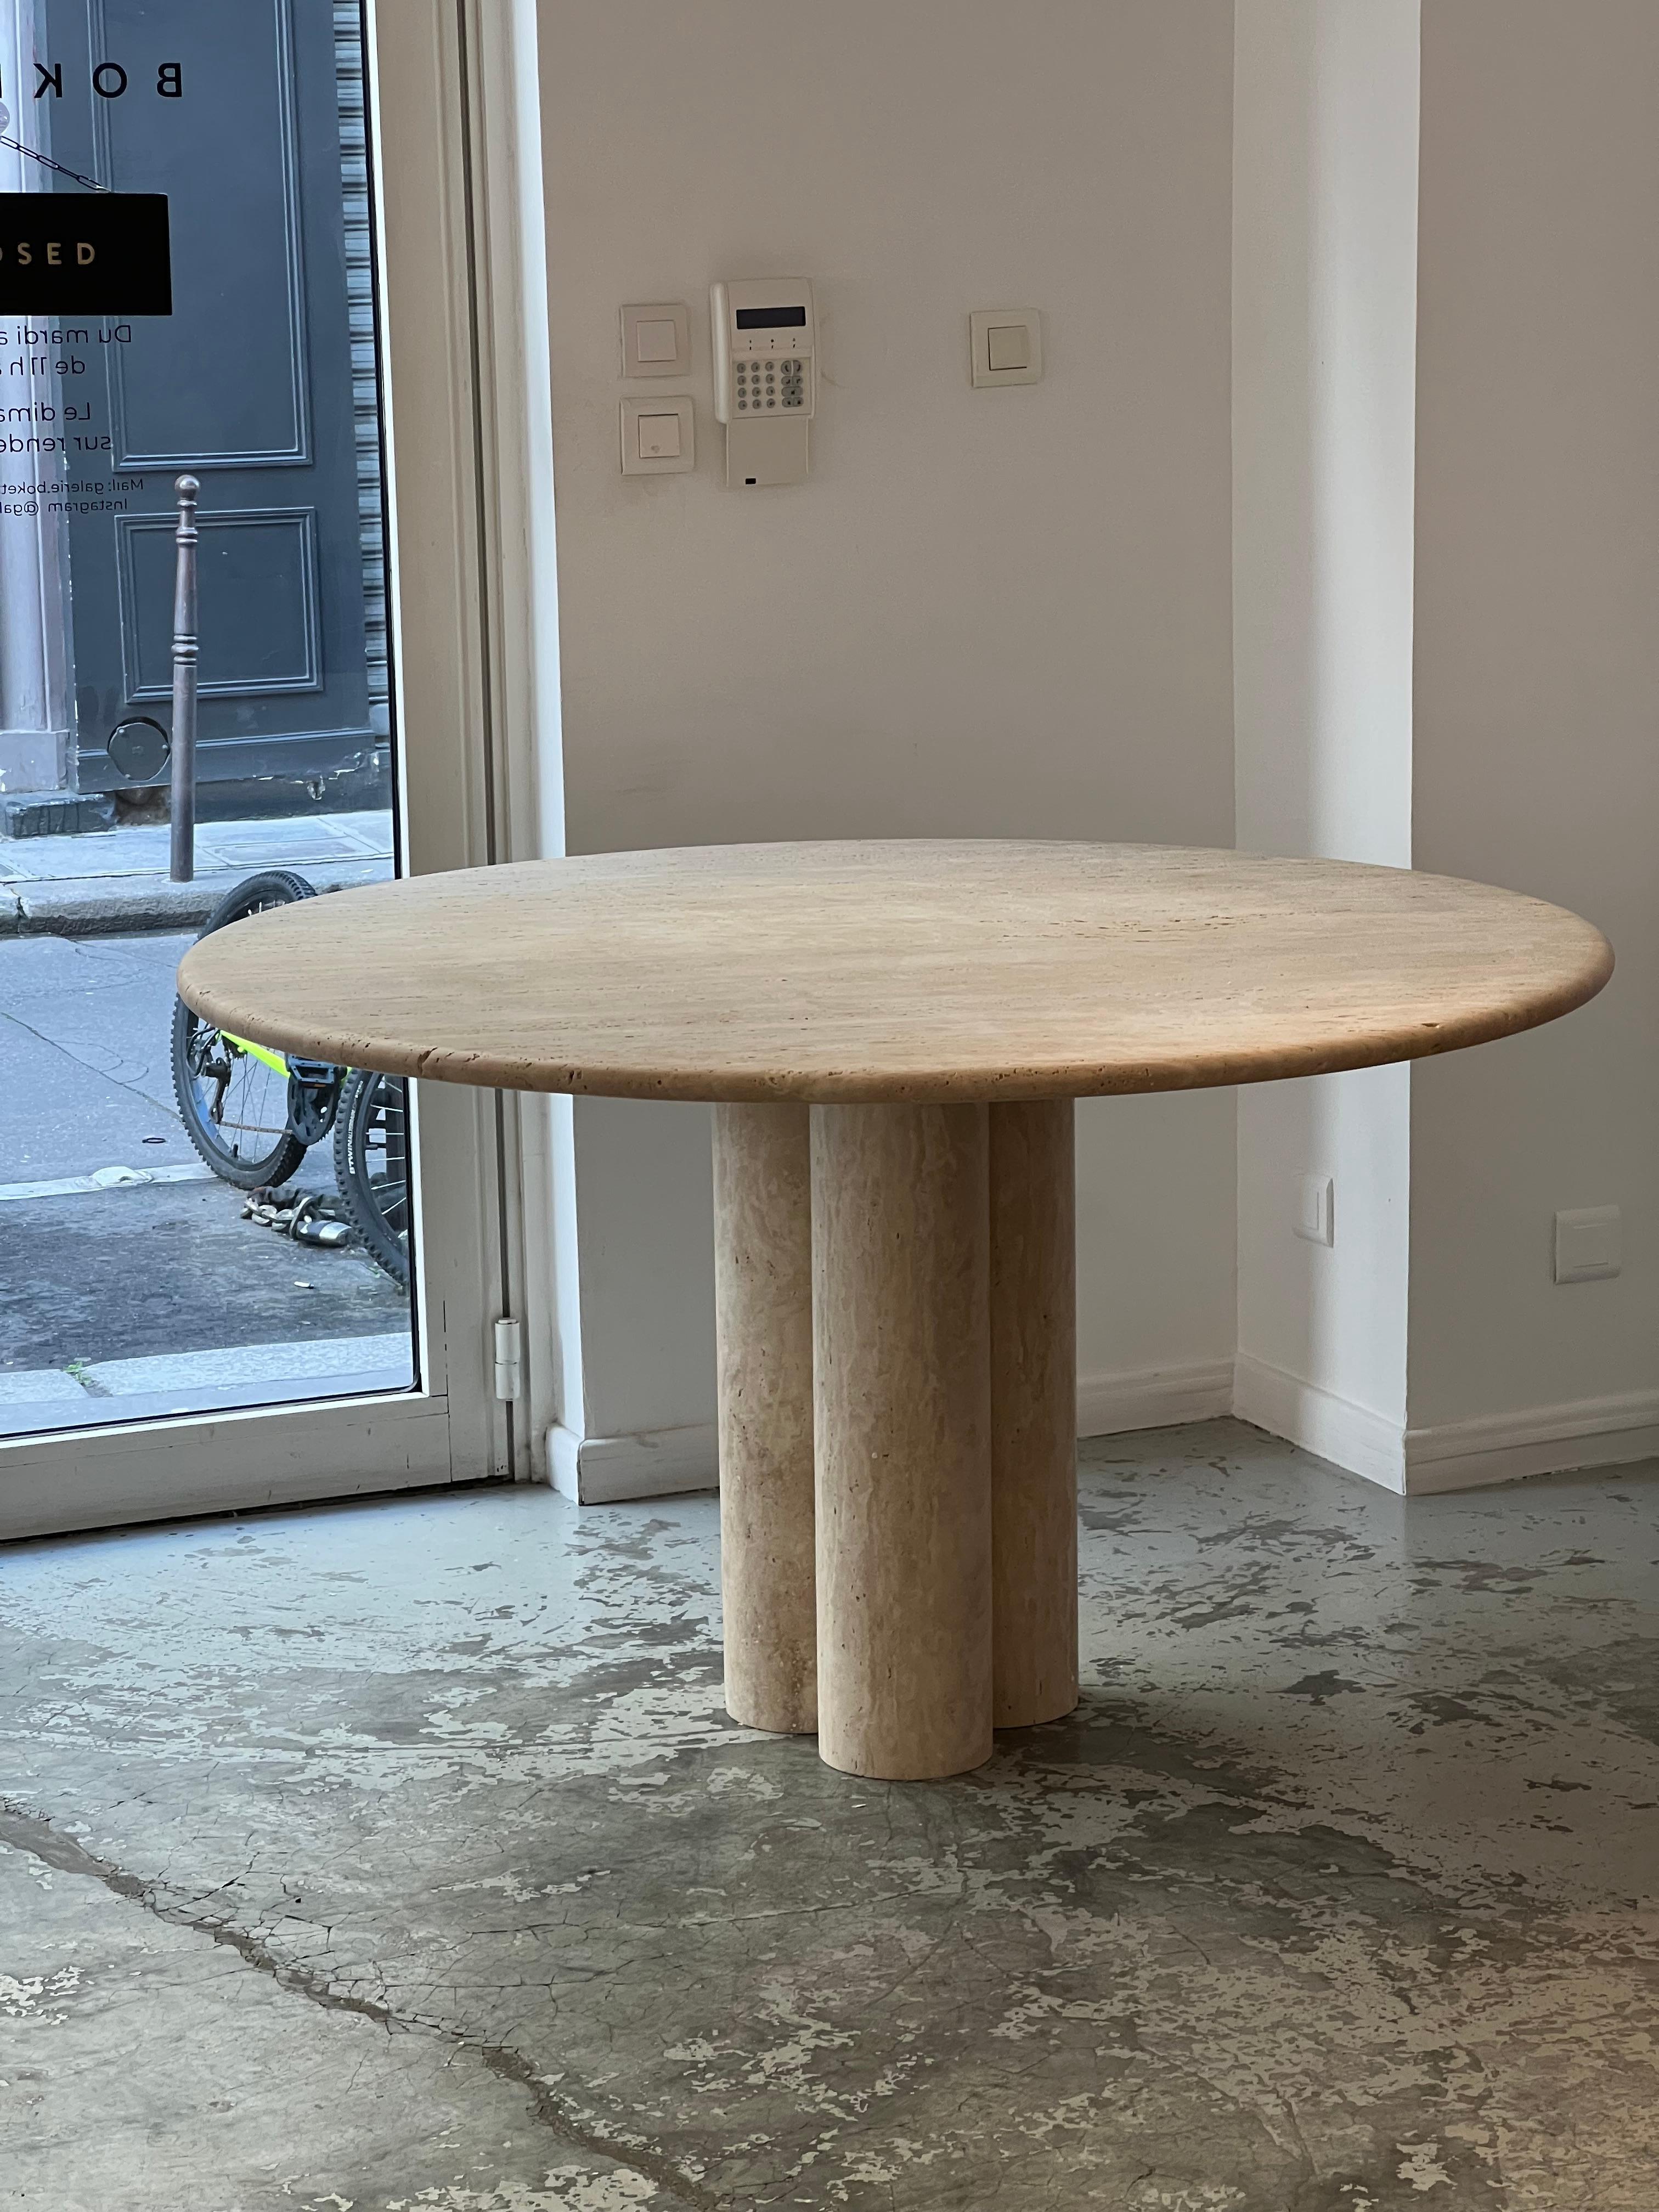 Table in natural untreated travertine. The overall structure is in travertine. The top is circular and rests directly on three solid cylinders forming the base.
In very good condition.